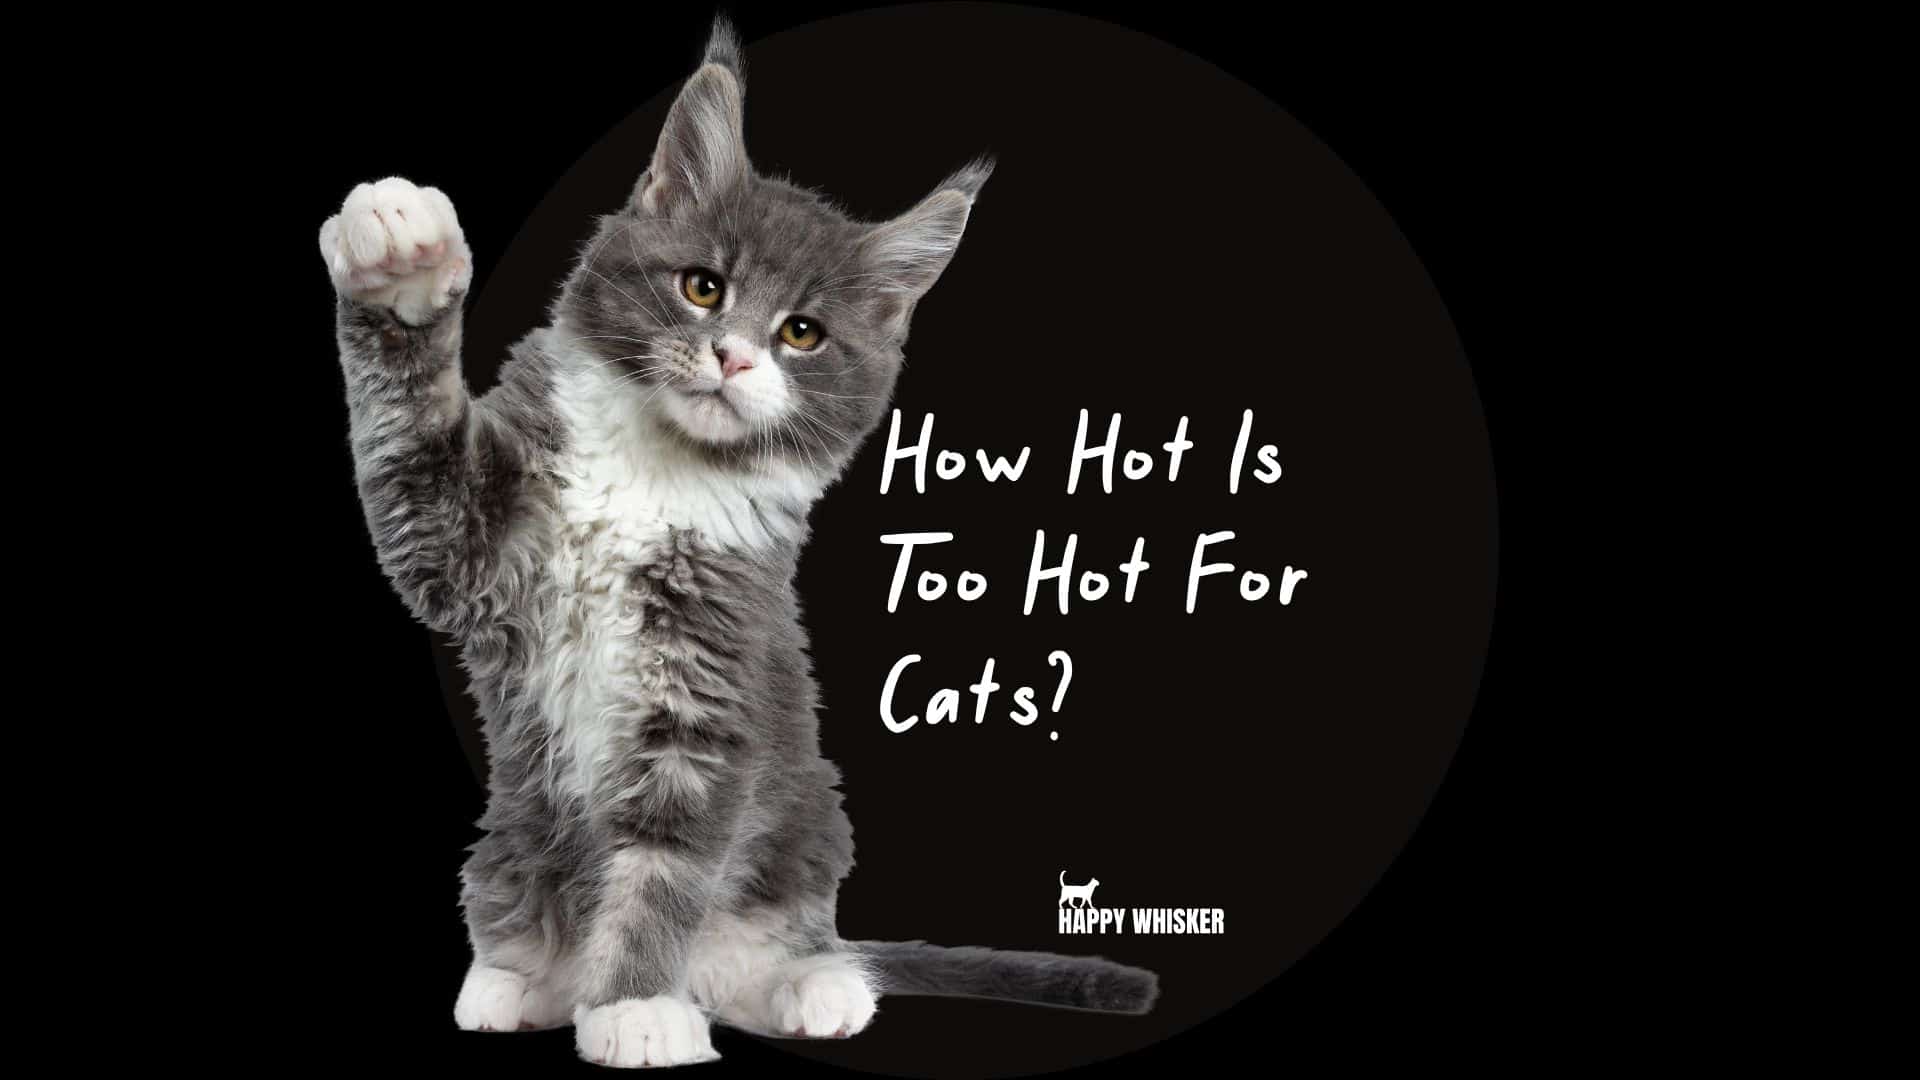 How Hot Is Too Hot For Cats